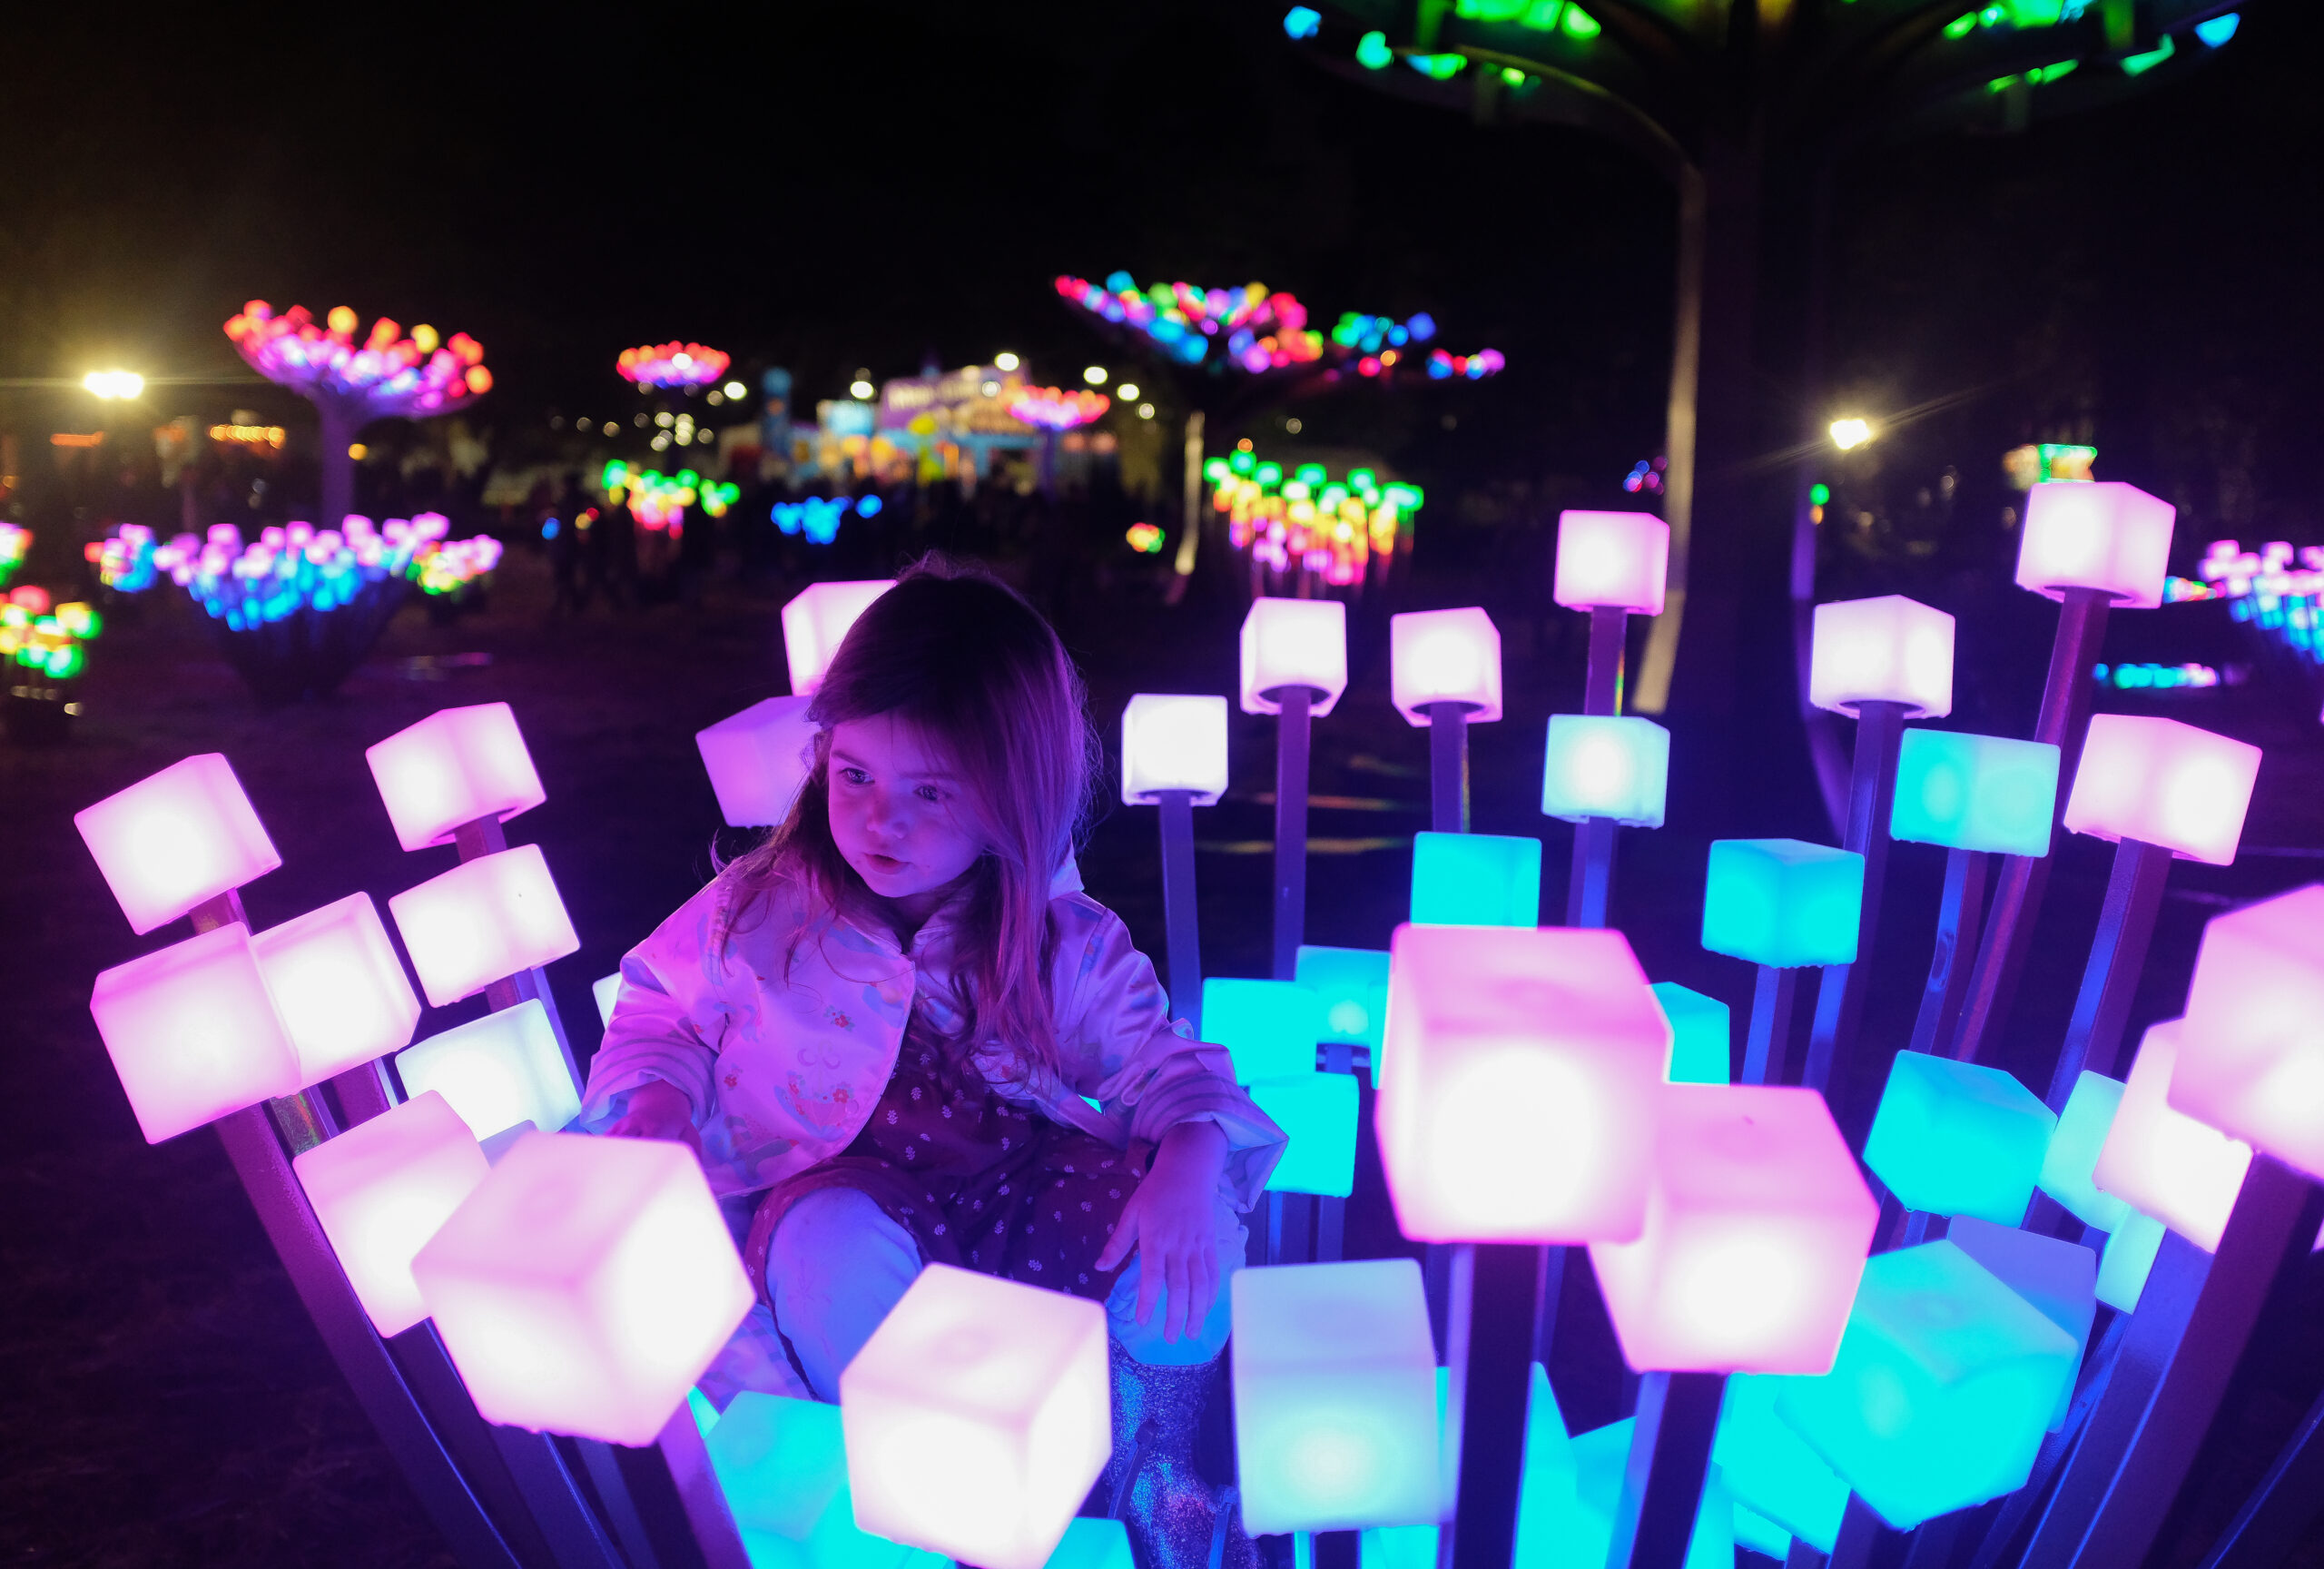 A smal child plays in a field of LED sugar cubes at night.